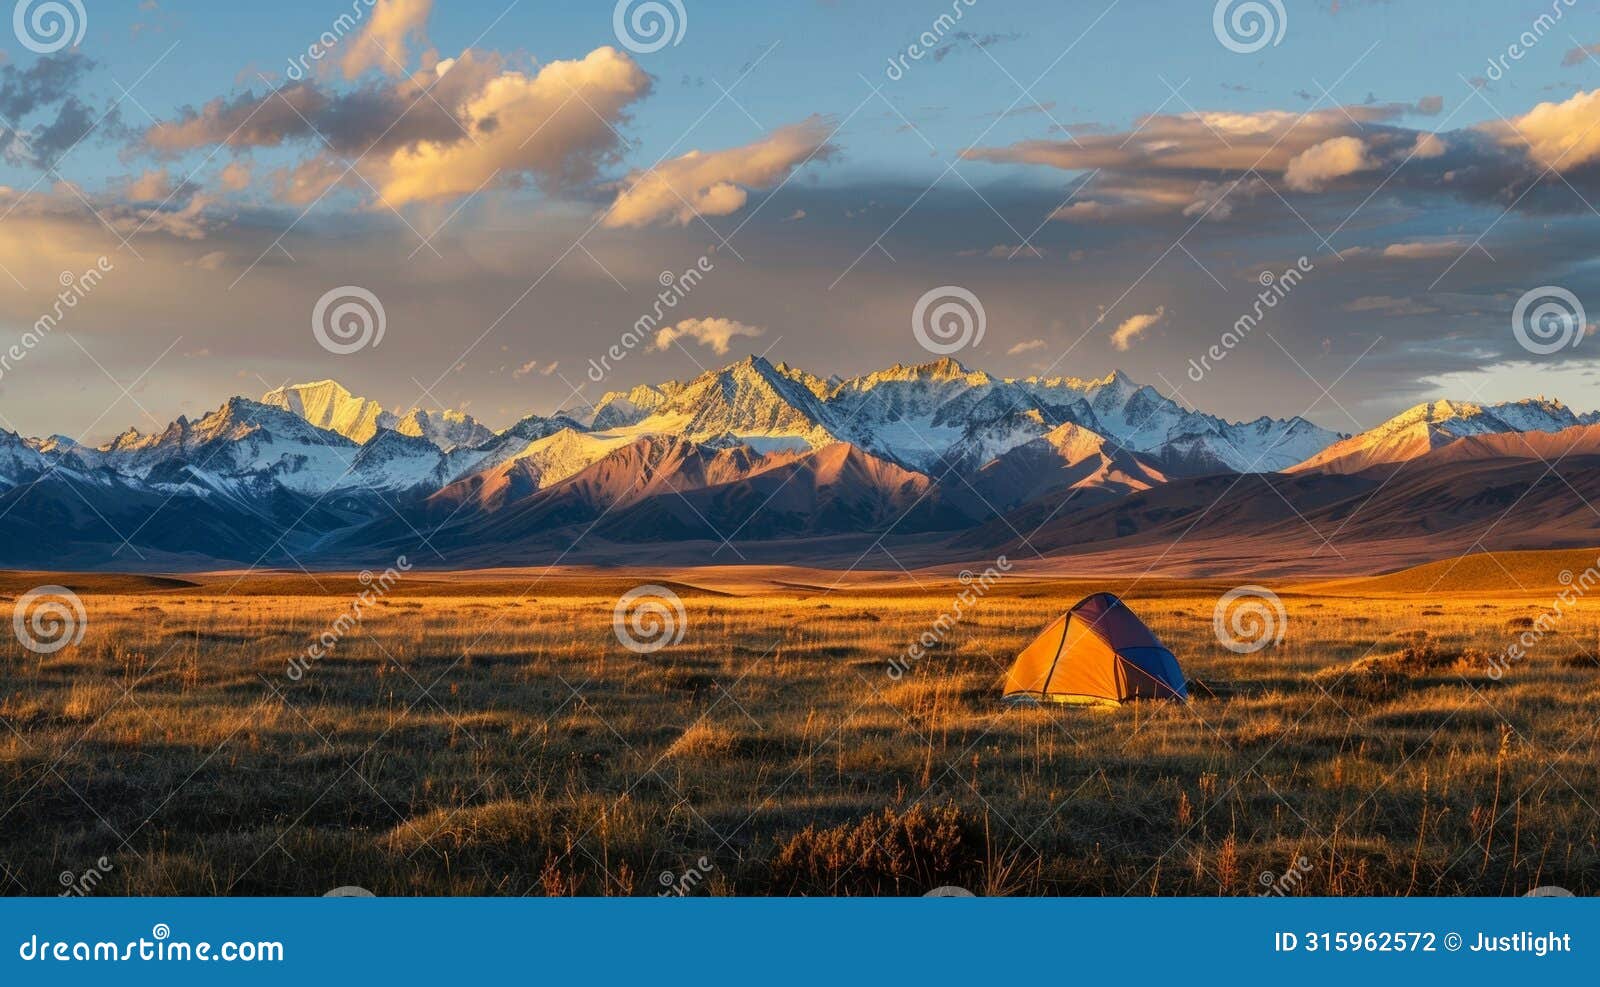 as the sun sets behind the distant mountains a solitary tent basks in the gentle light promising a night of restful